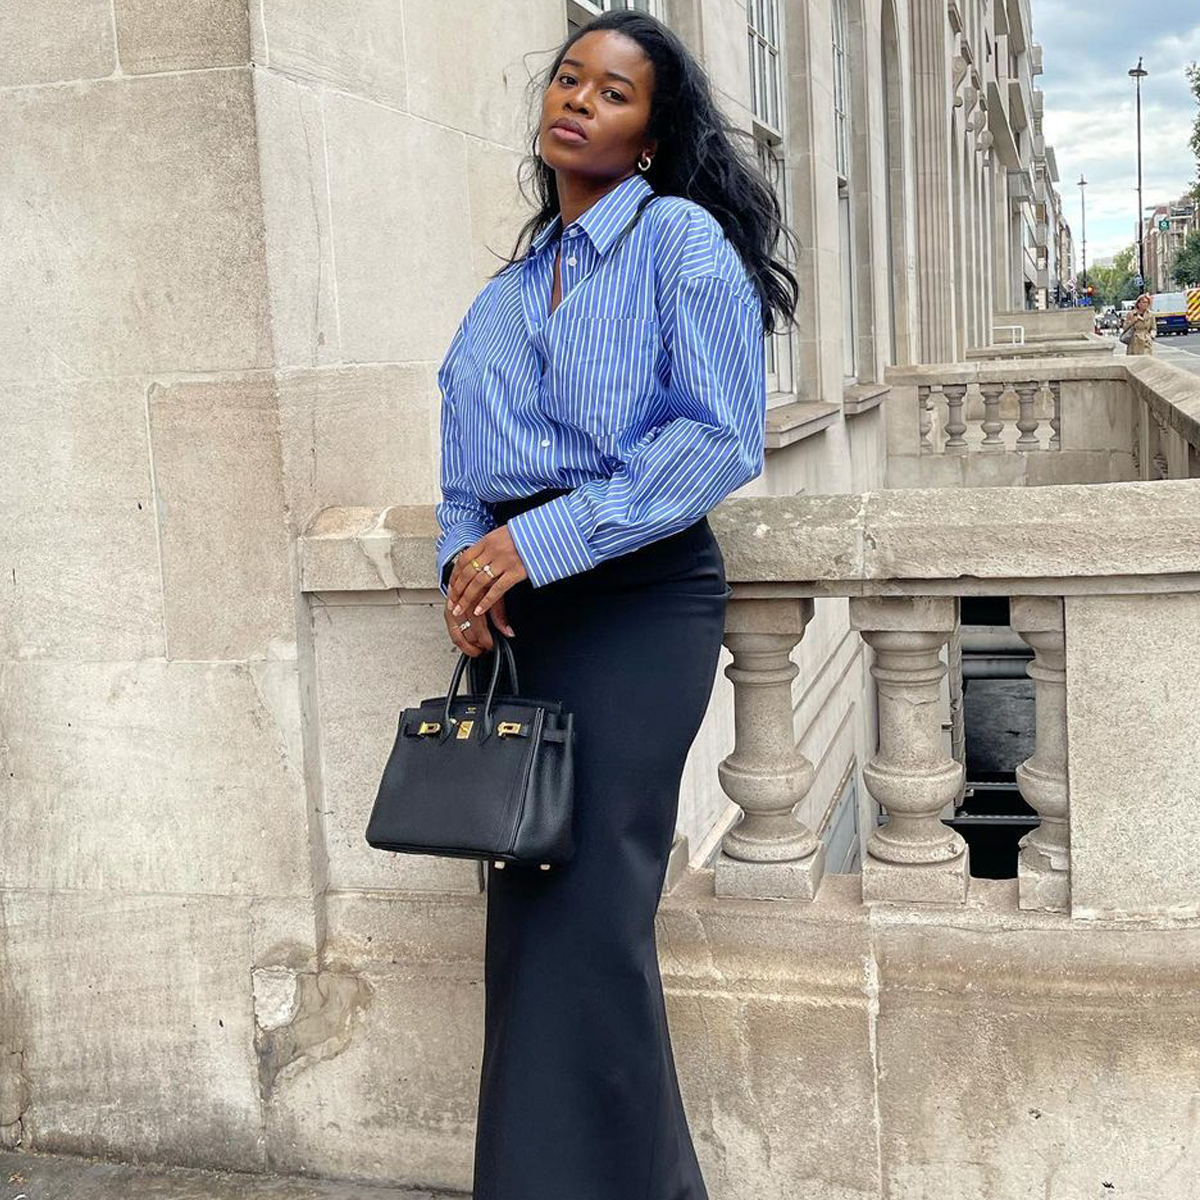 20 Long Skirt Outfits to Wear for Any Occasion